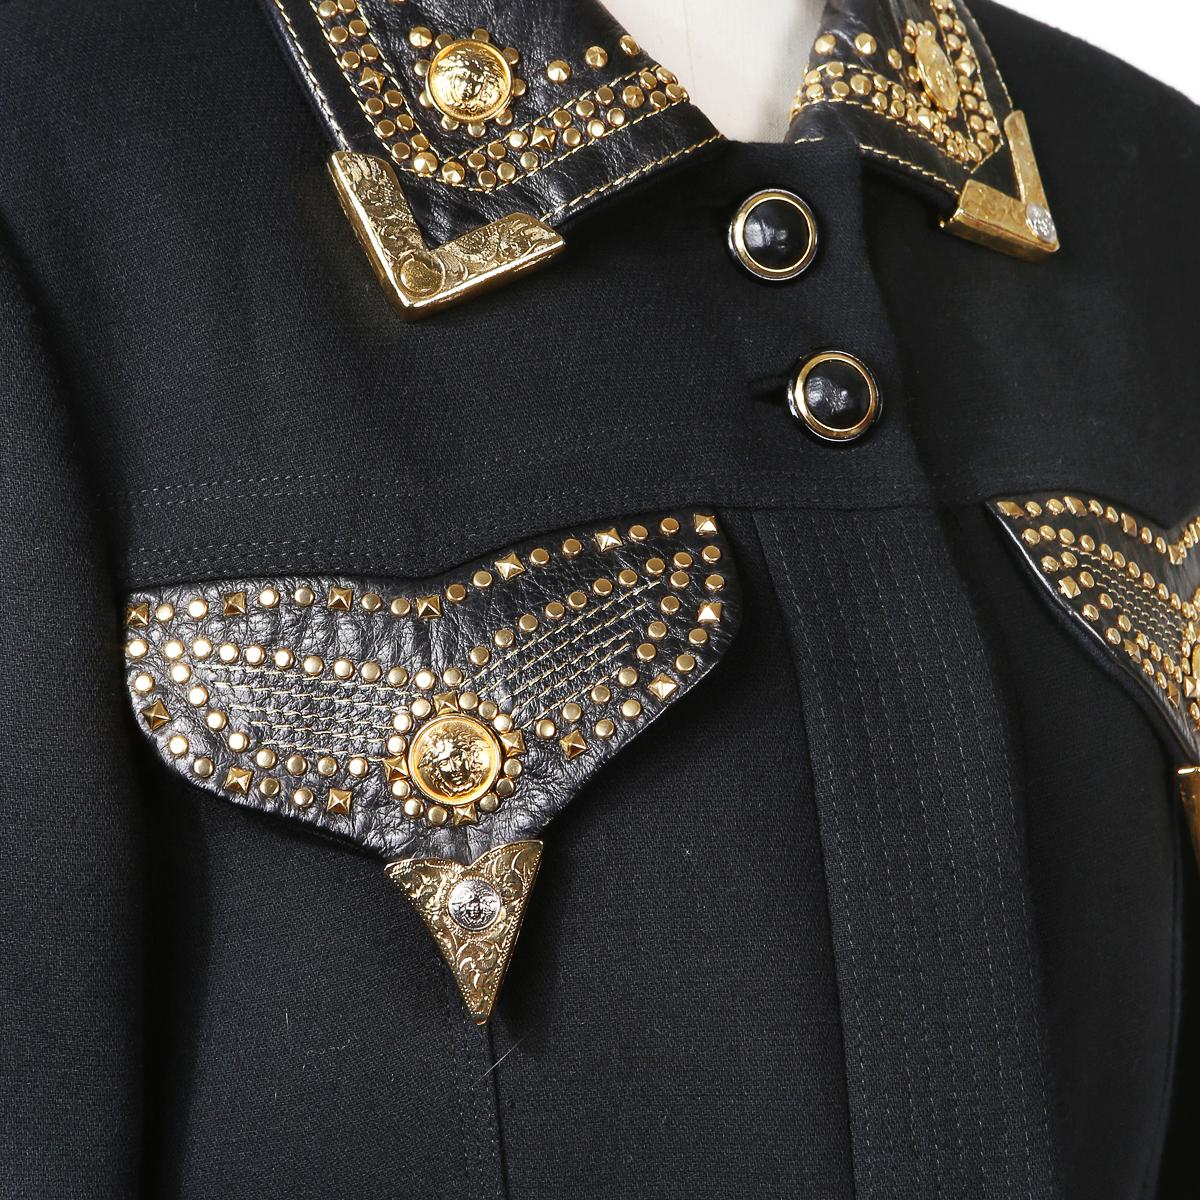 Black Versace Jacket with Embellished Pockets and Collar, early 1990s